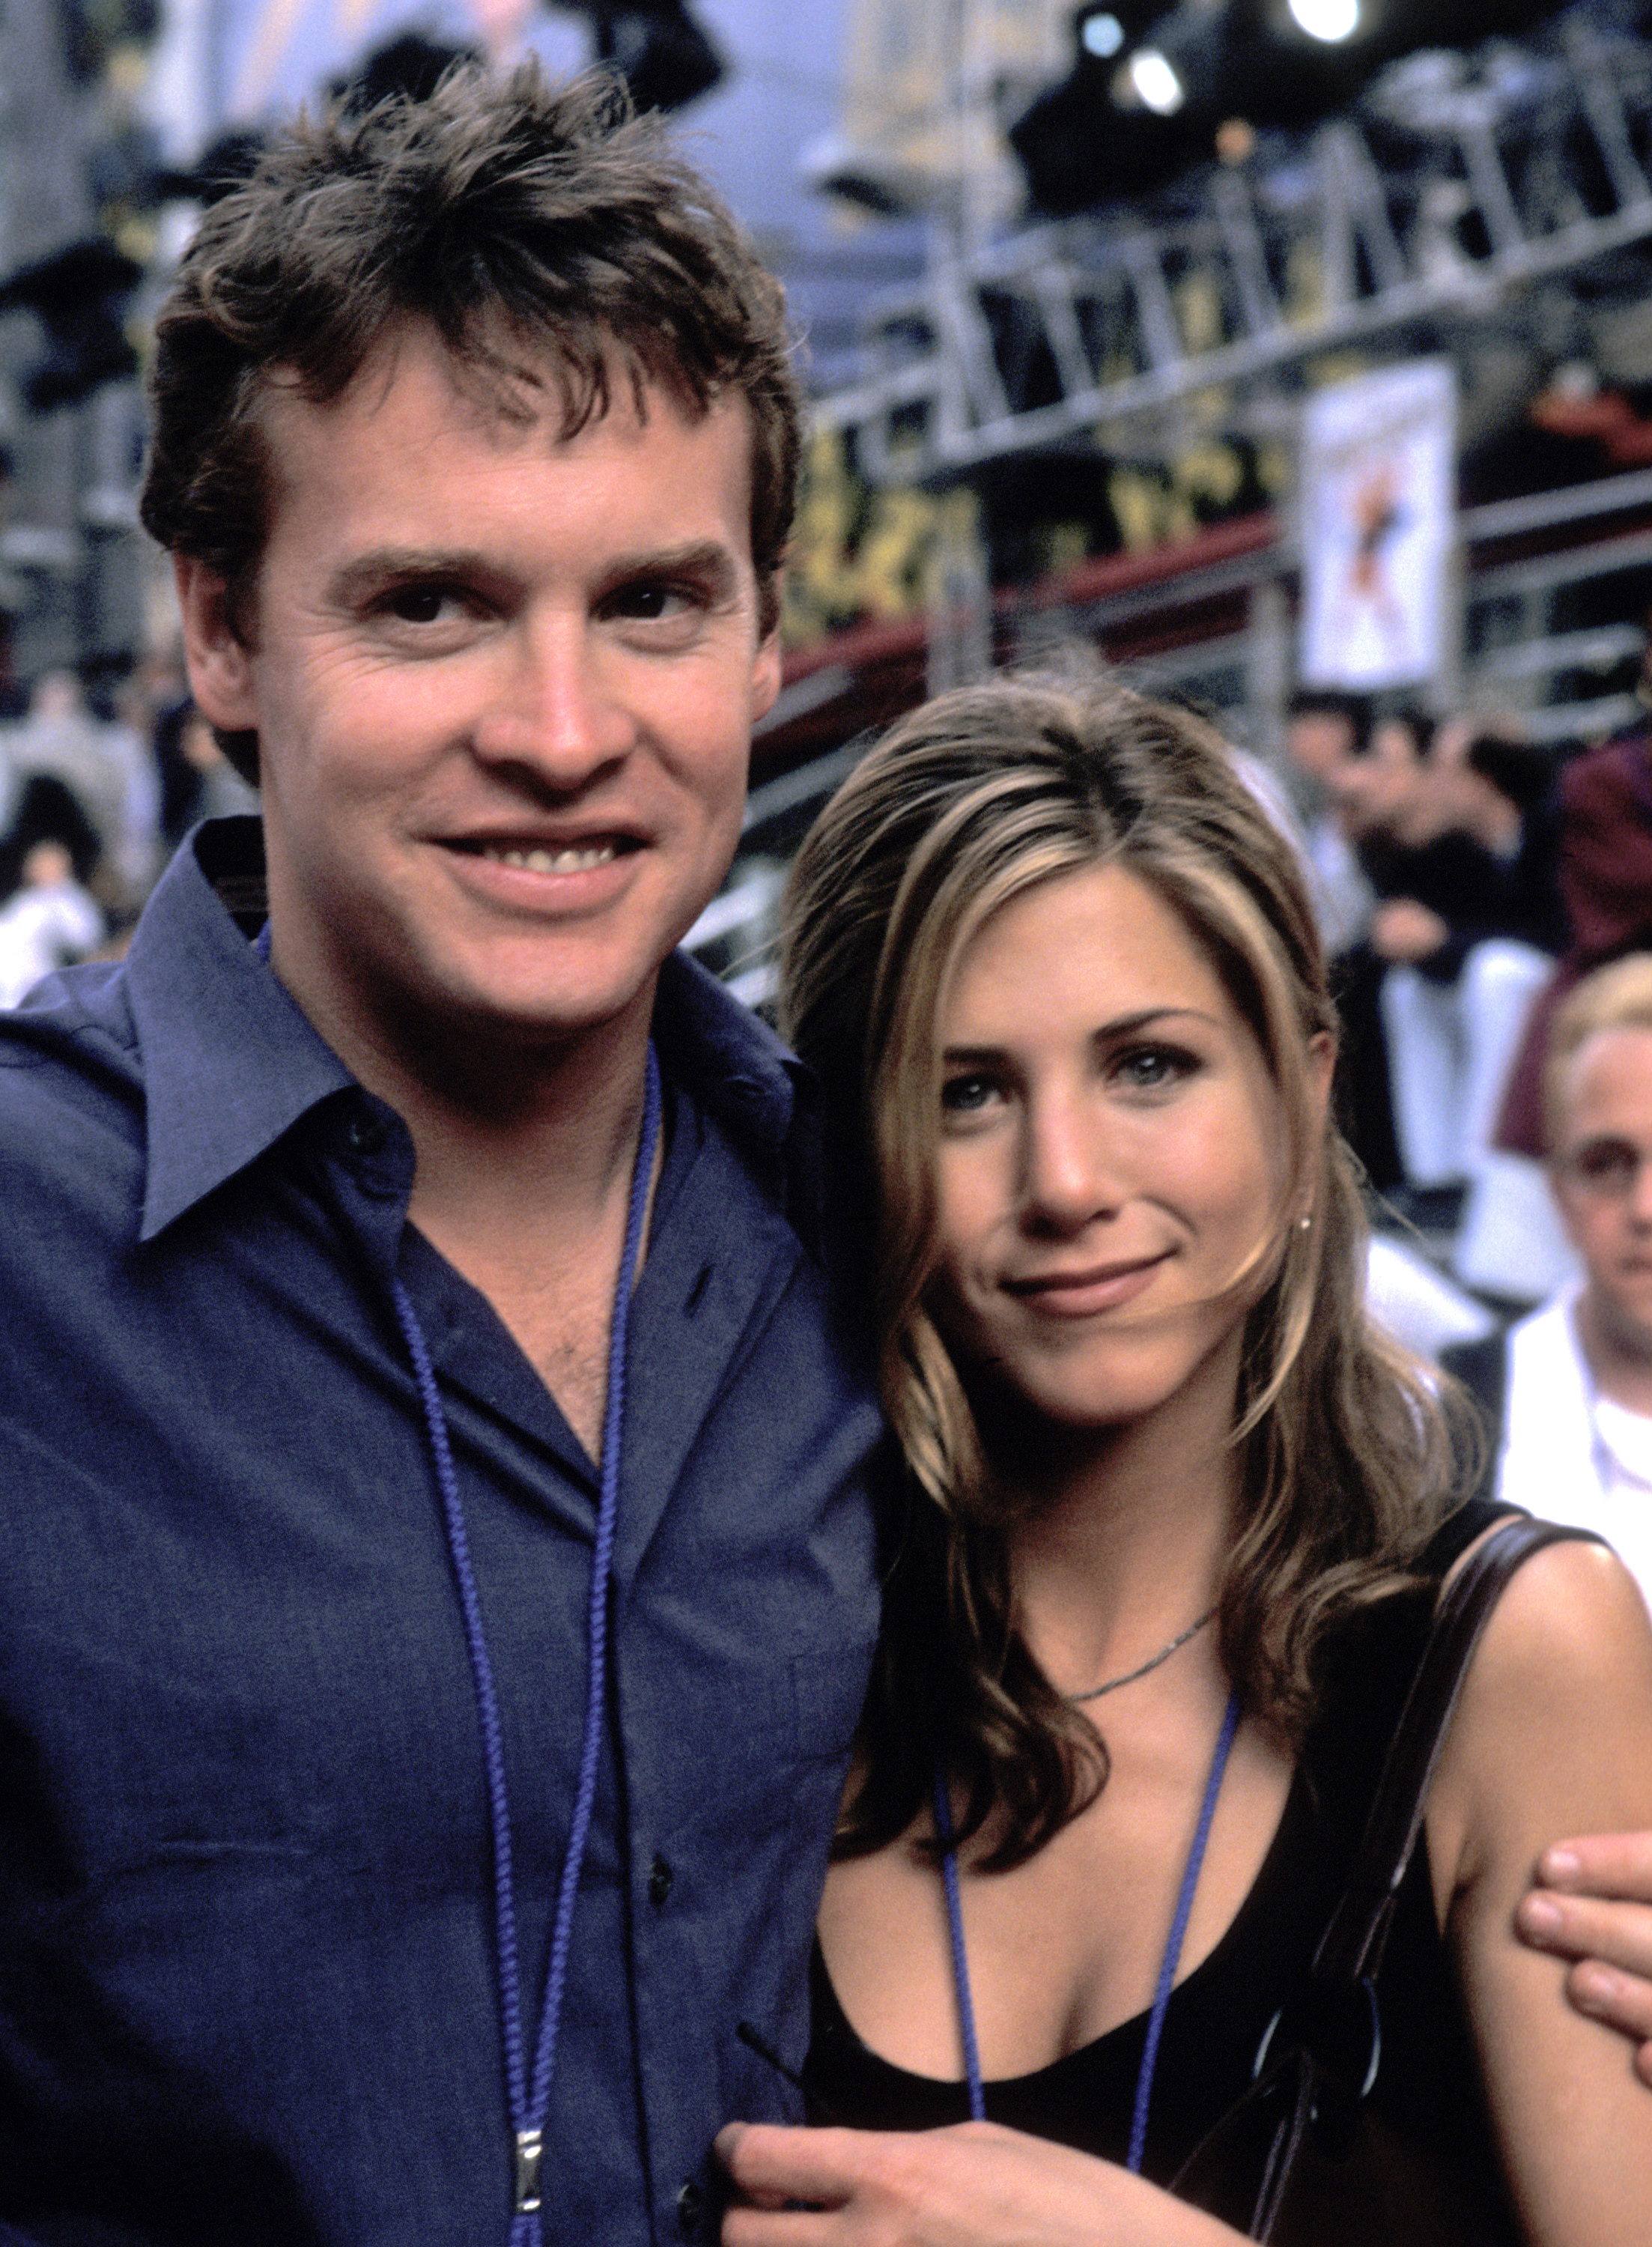 Tate Donovan and Jennifer Aniston during the world premiere of "Hercules" | Source: Getty Images